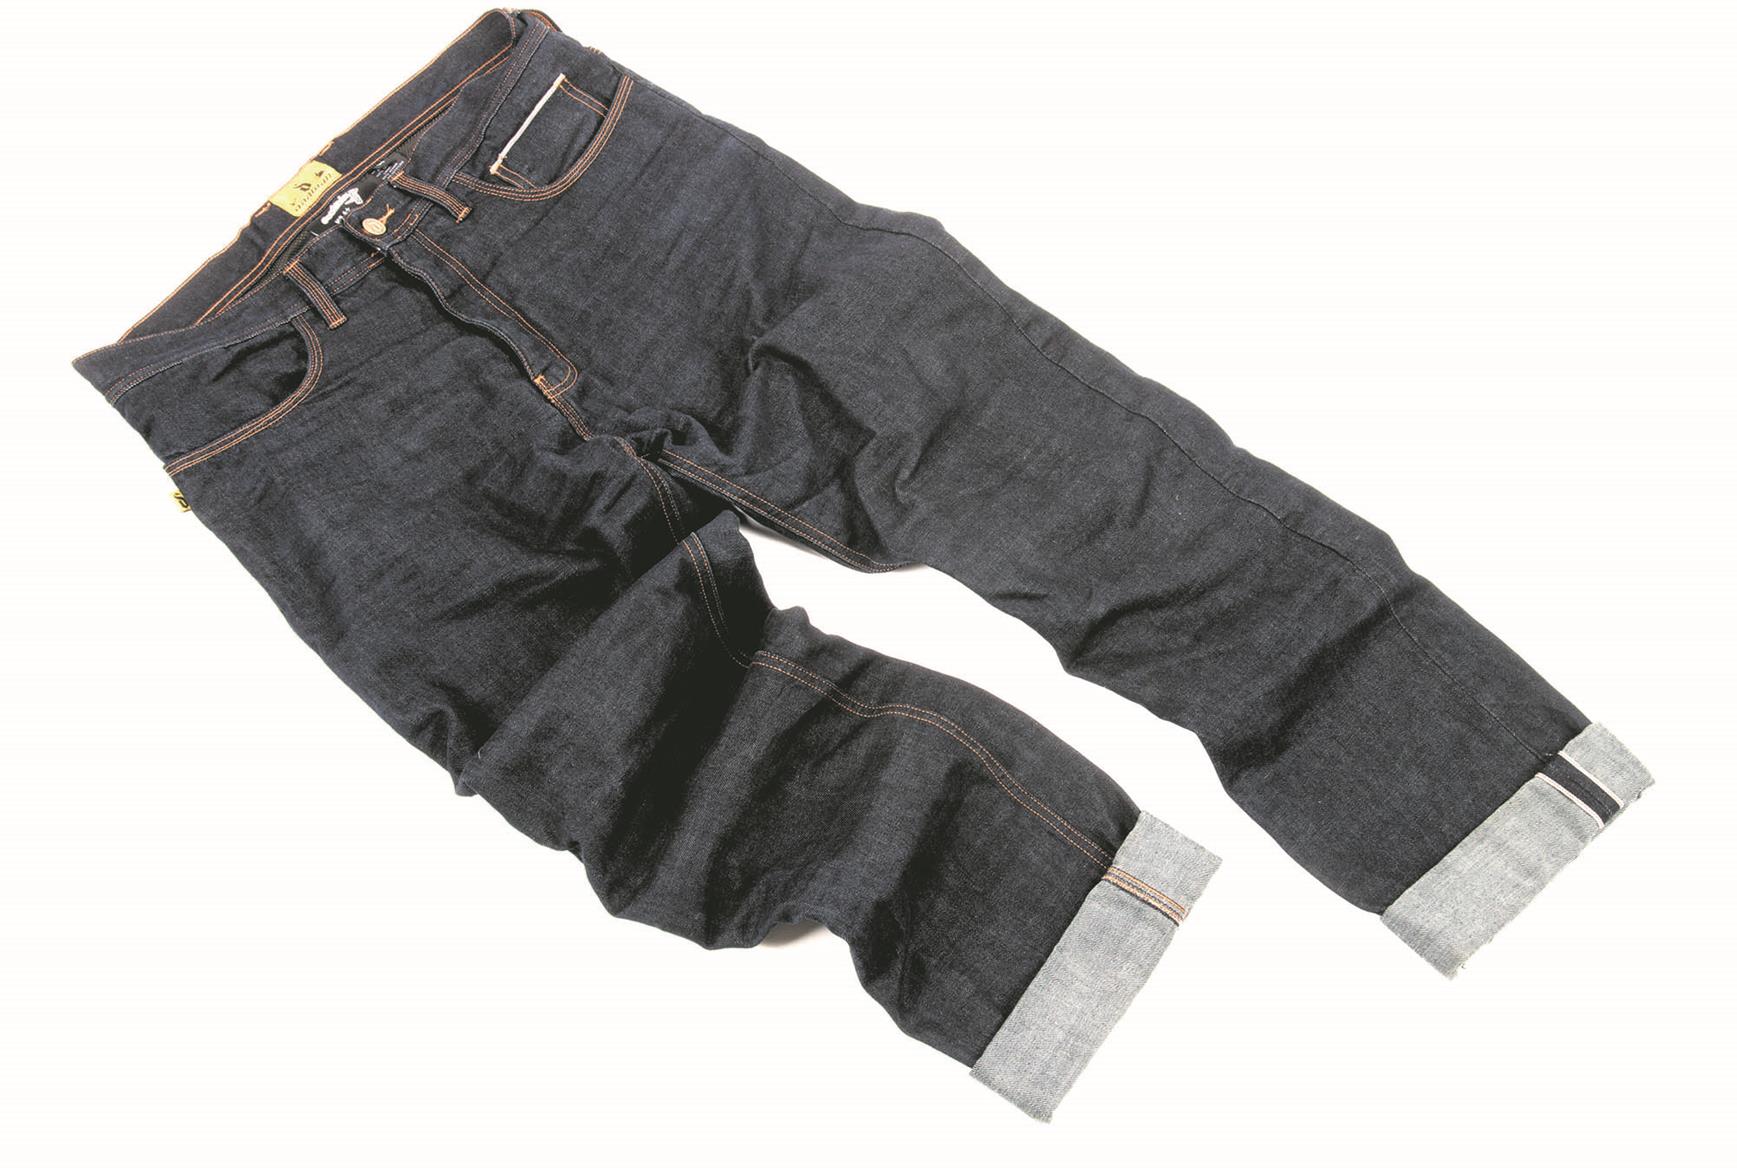 selvedge motorcycle jeans